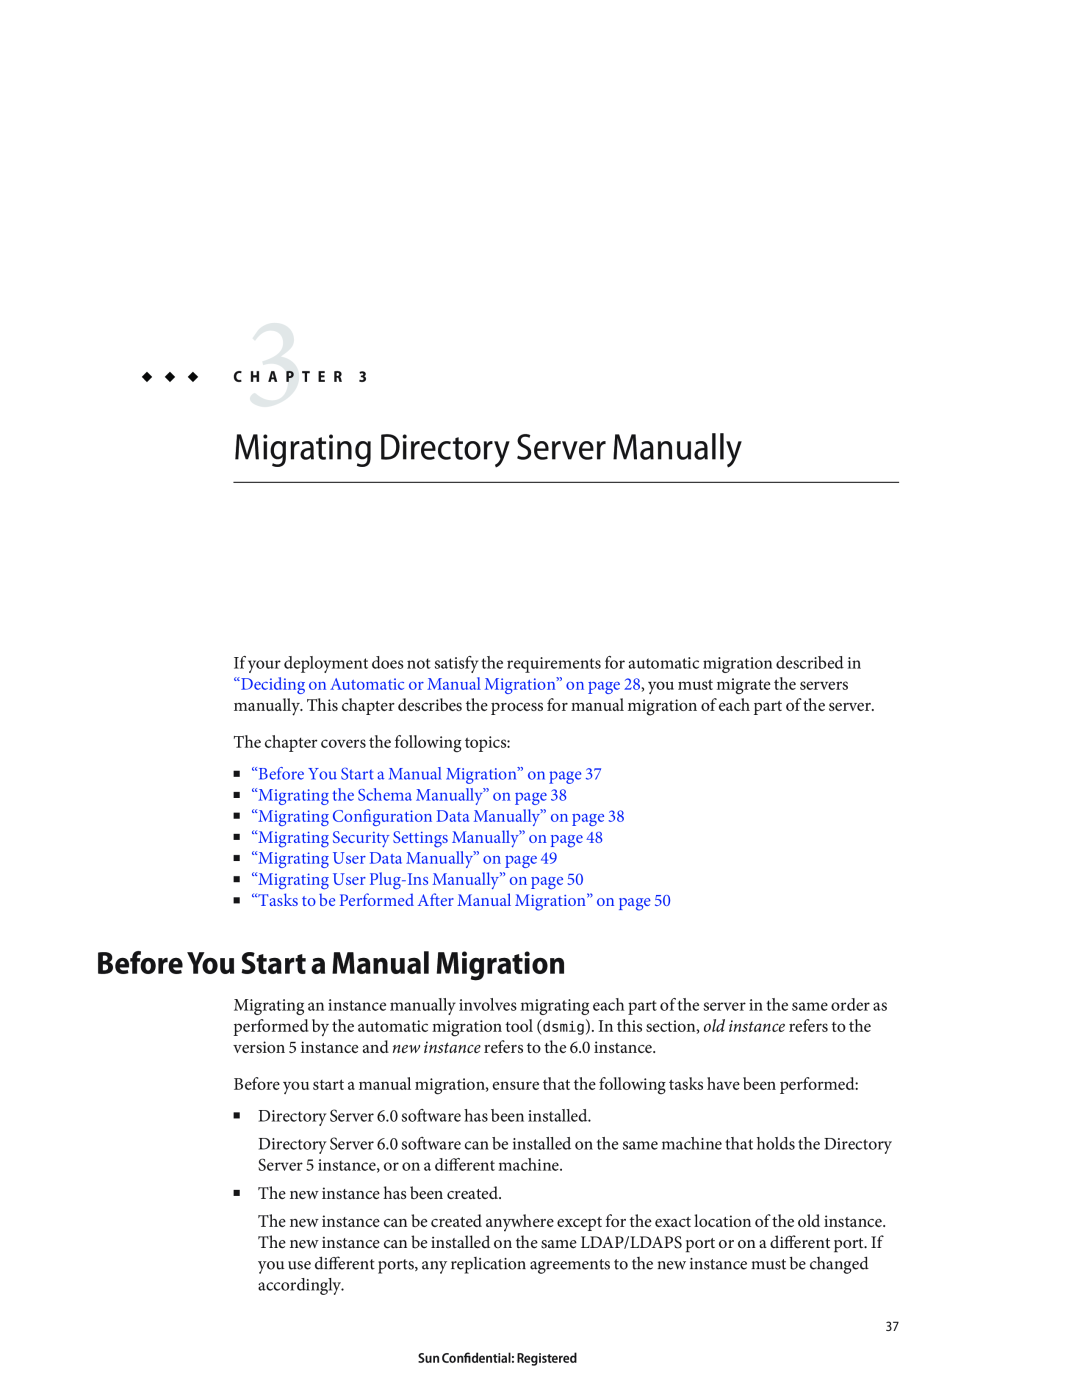 Sun Microsystems 8190994 manual Migrating Directory Server Manually, Before You Start a Manual Migration 